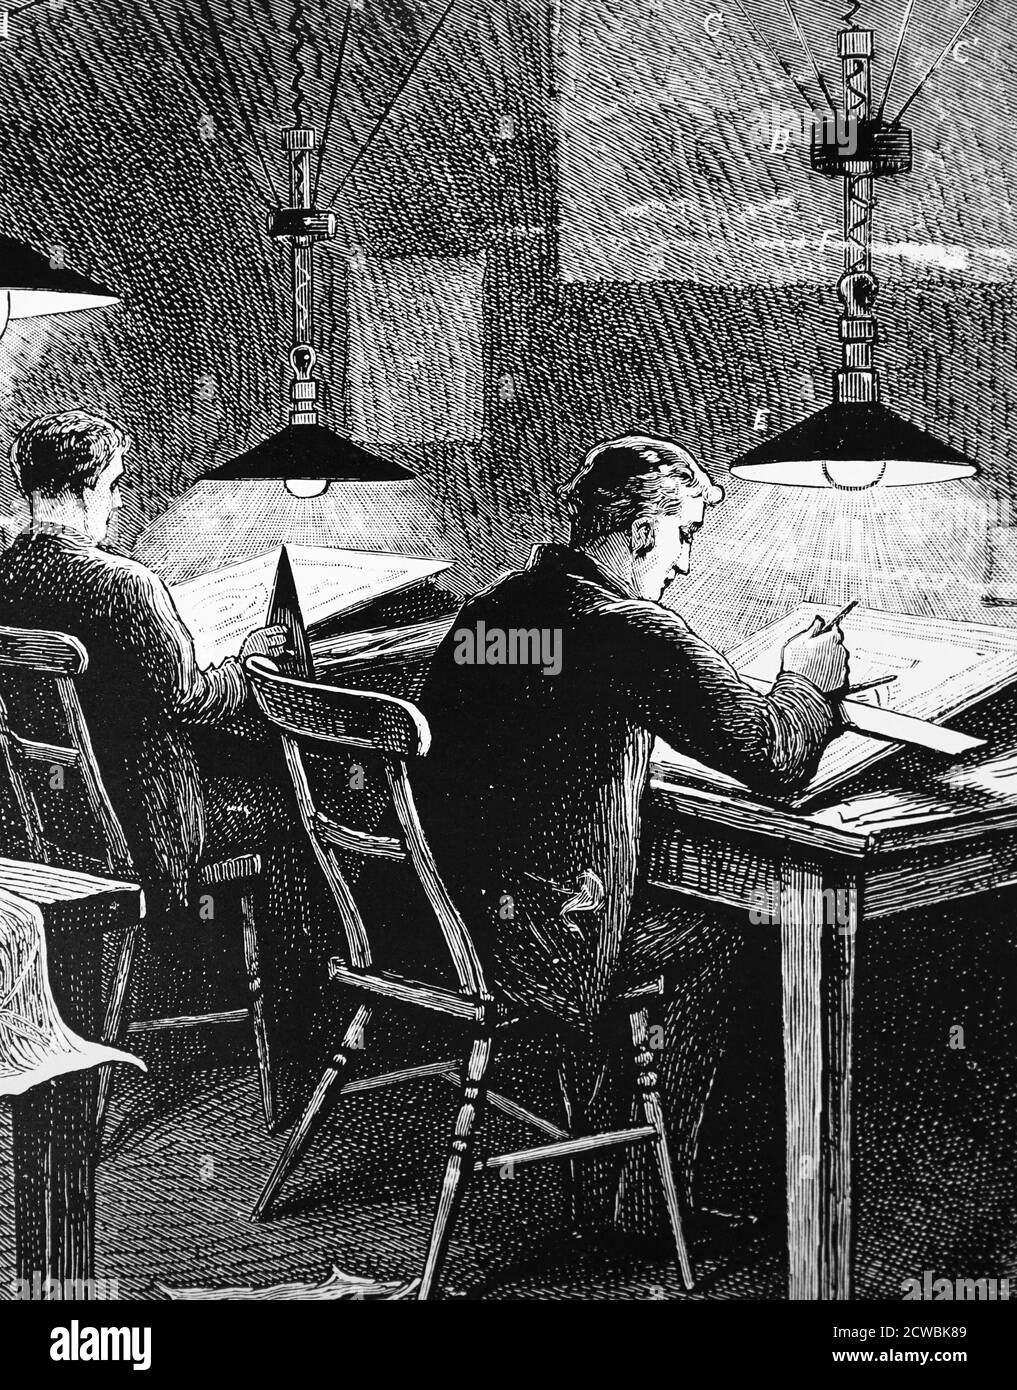 Engraving depicting an engineering classroom at the University of Dundee. The classroom is fitted with Swan incandescent lamps. Stock Photo